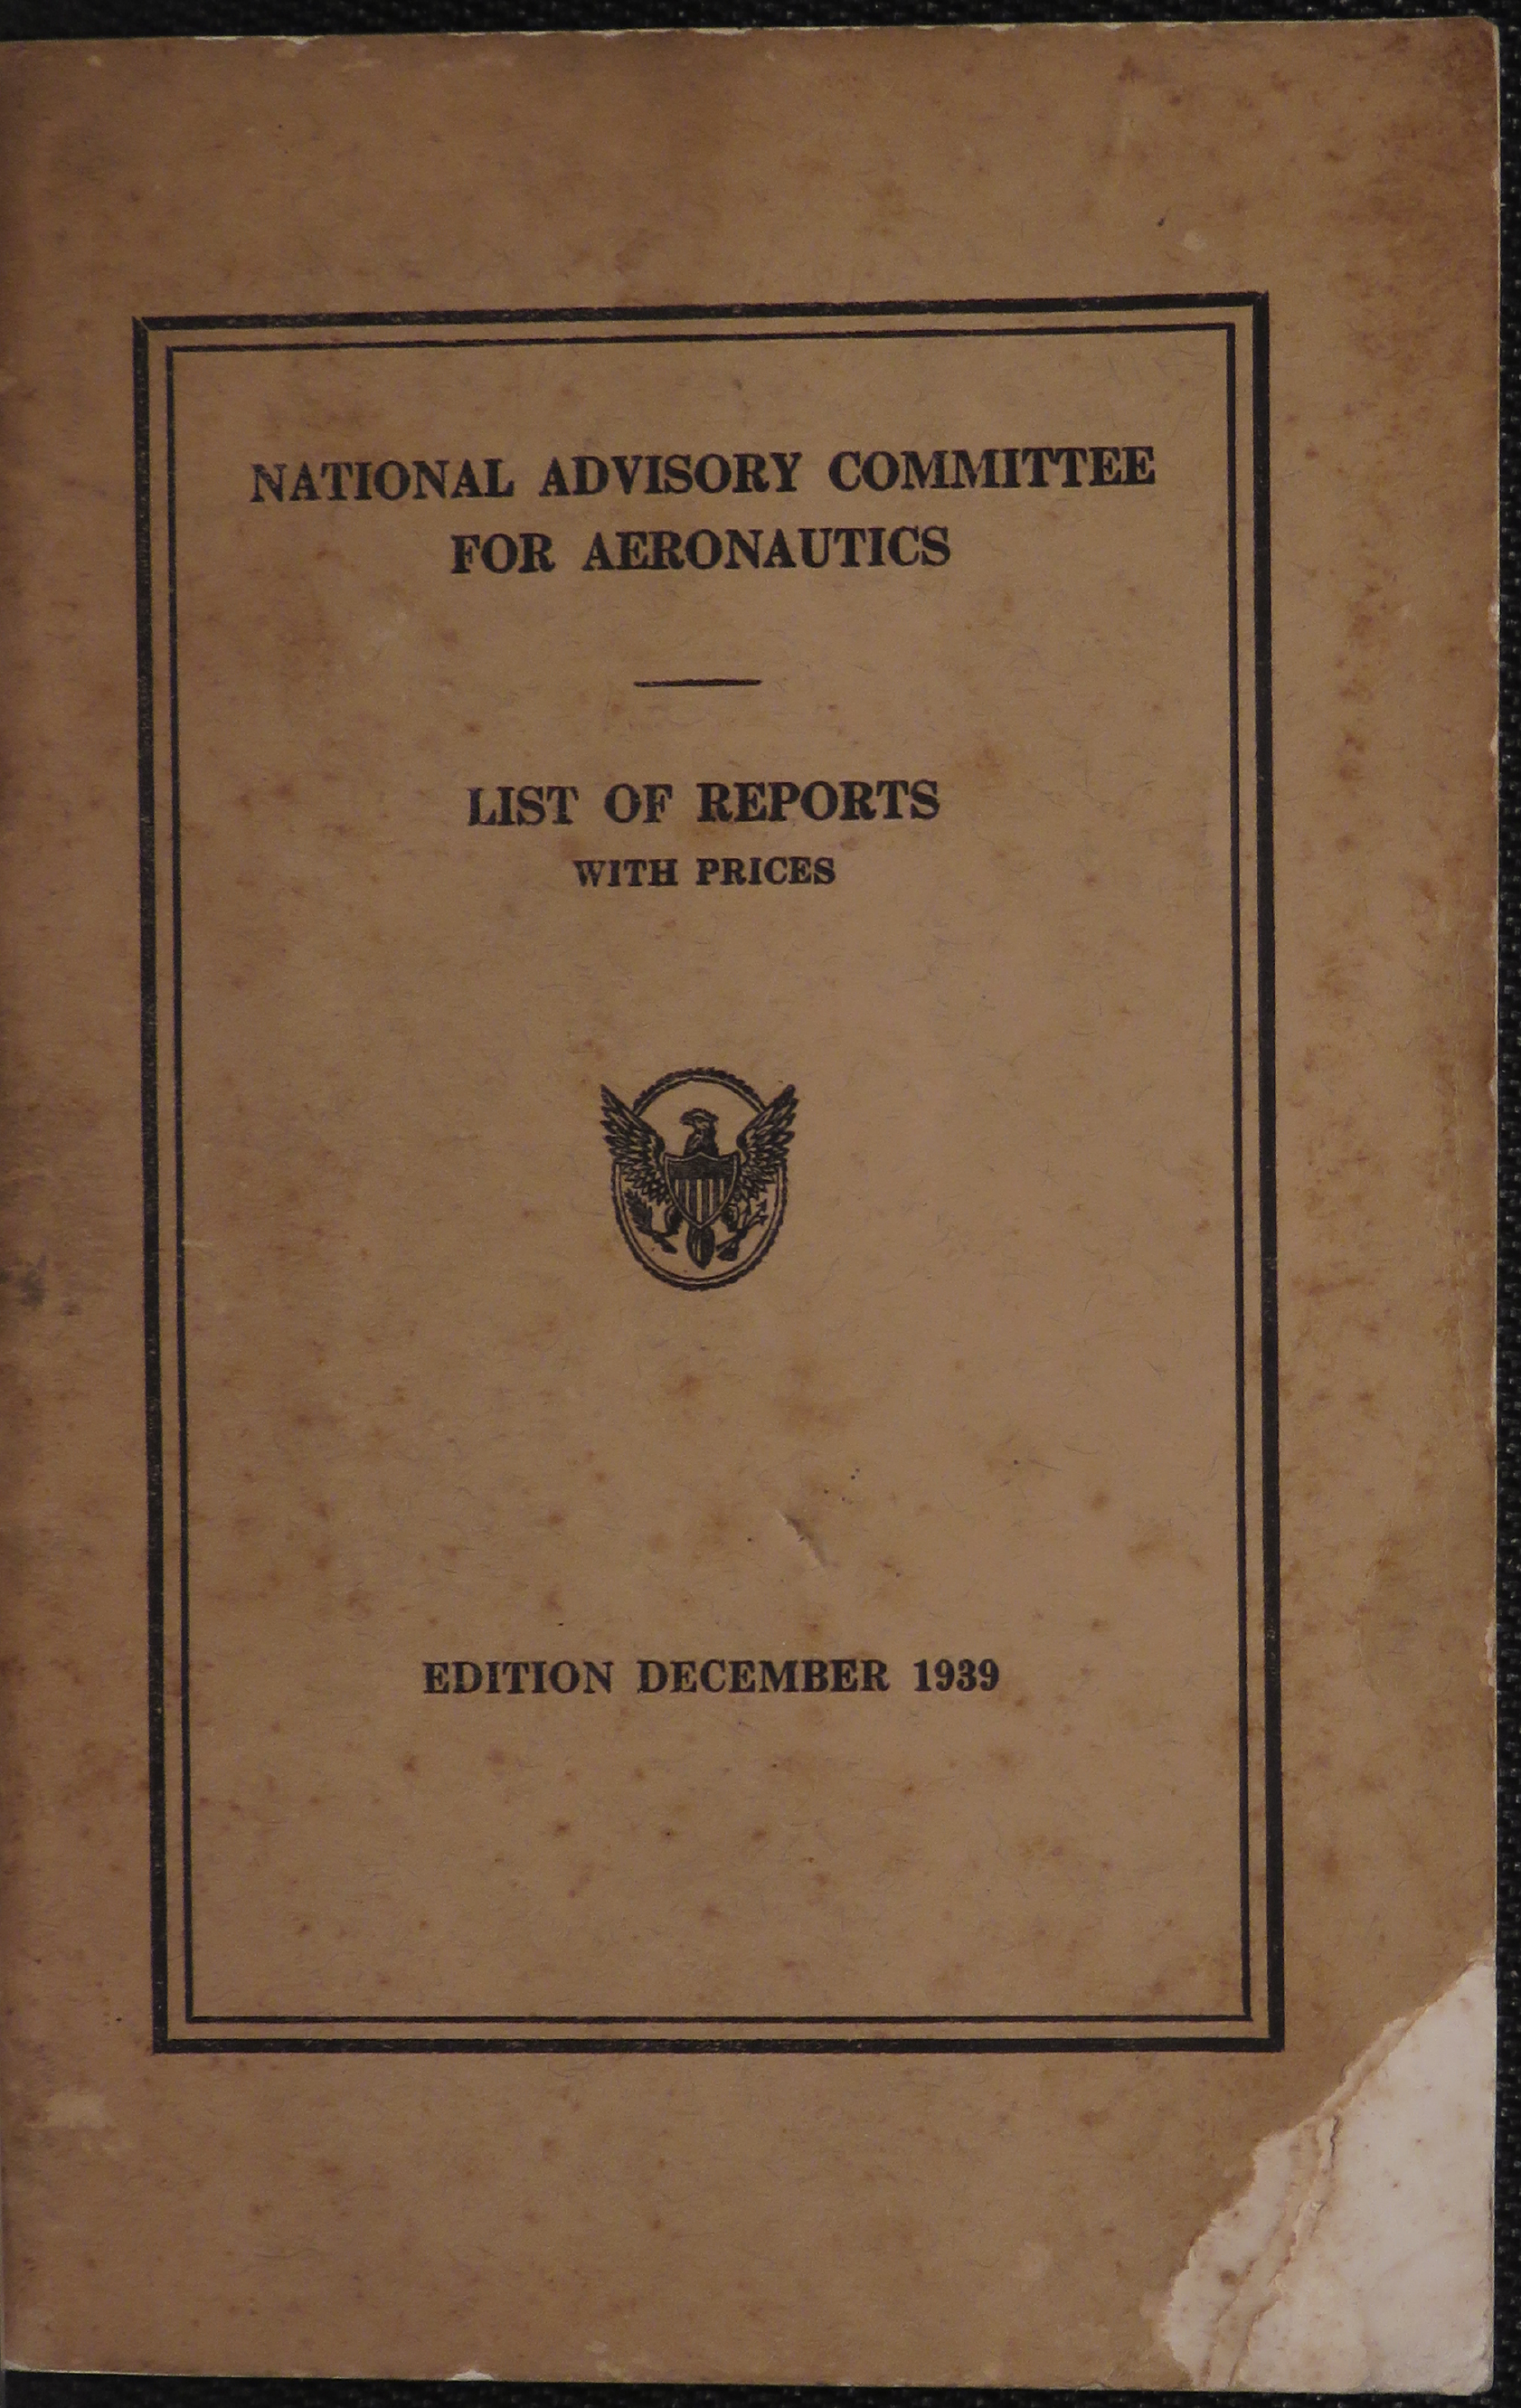 Sample page 1 from AirCorps Library document: National Advisory Committee for Aeronautics List of Reports with Prices